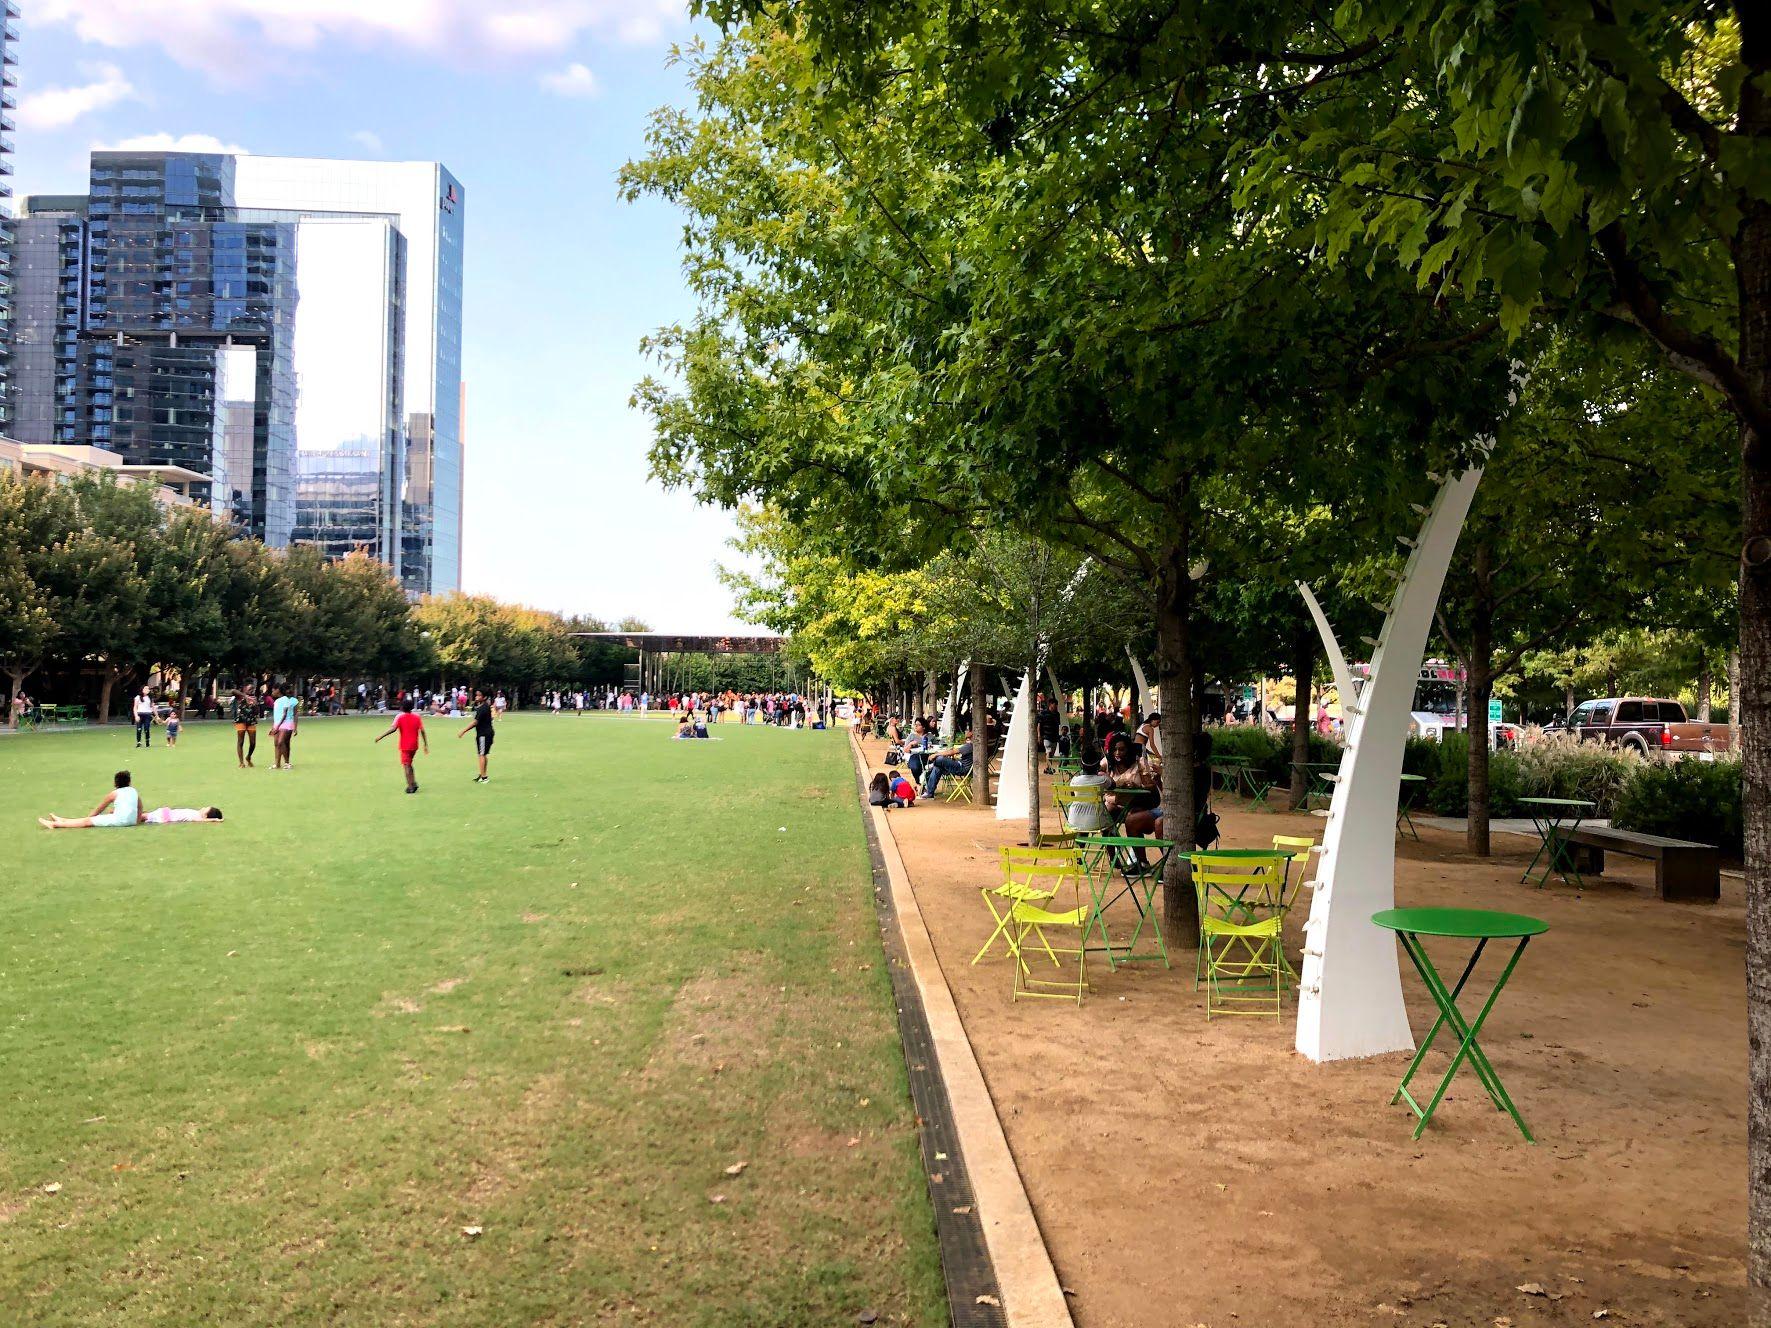 The lawn area and a shaded area with picnic tables in Klyde Warren Park